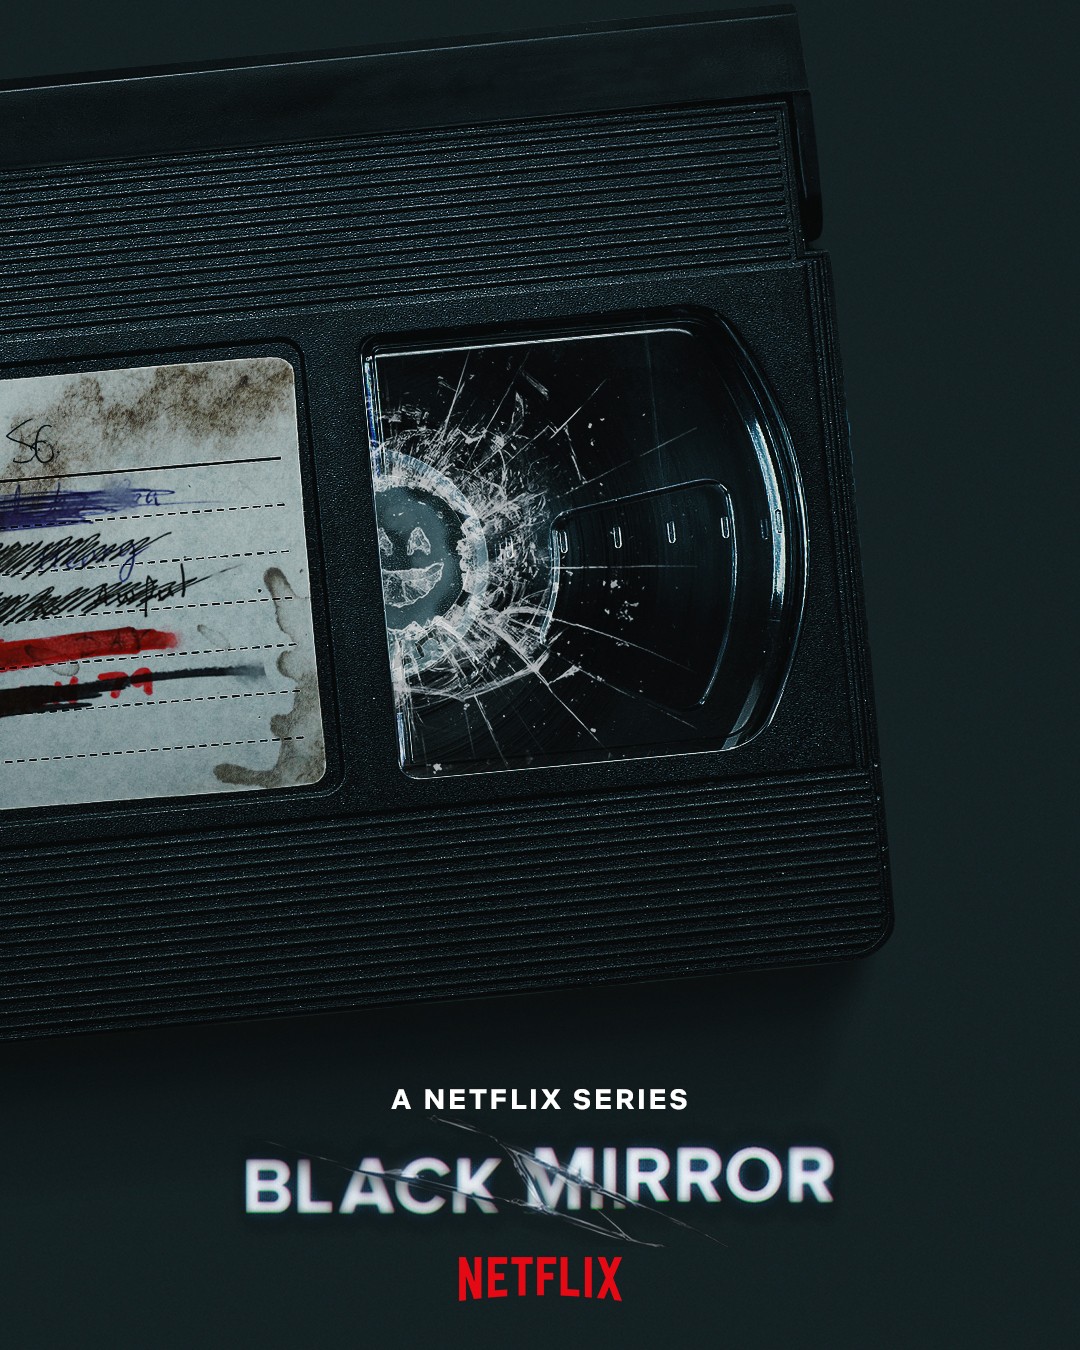 17 Behind The Scene Facts About Black Mirror On Netflix